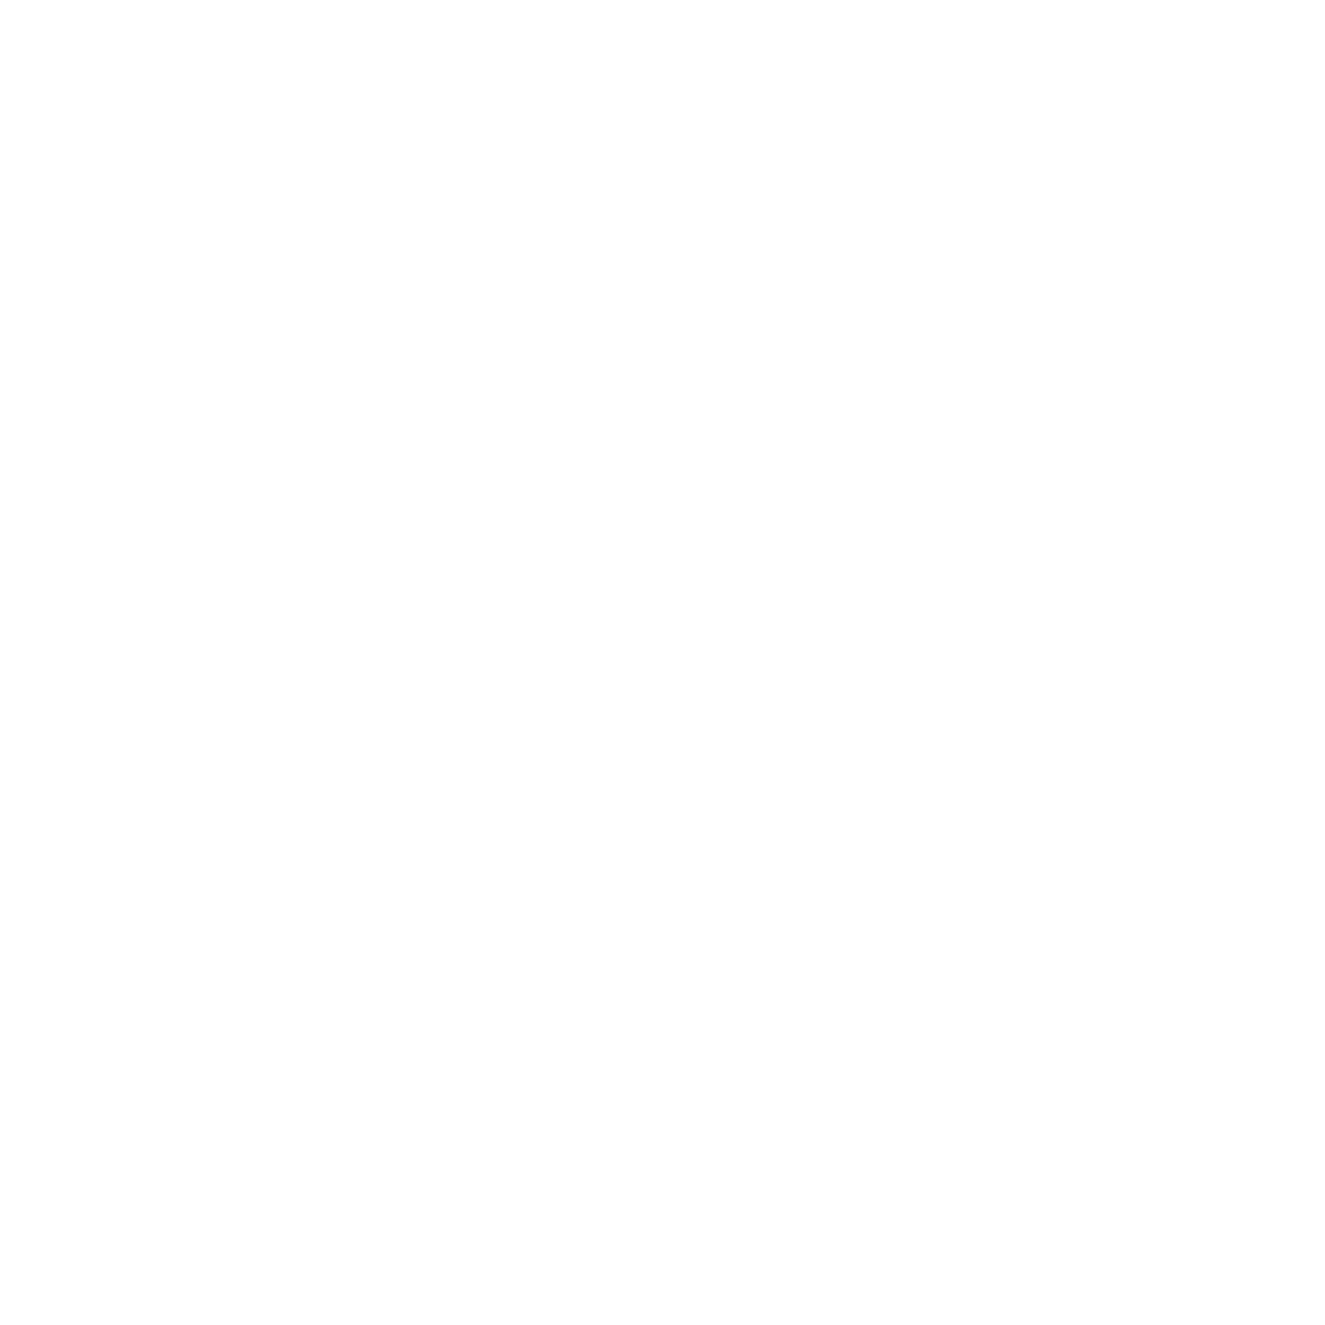 Worried About Henry